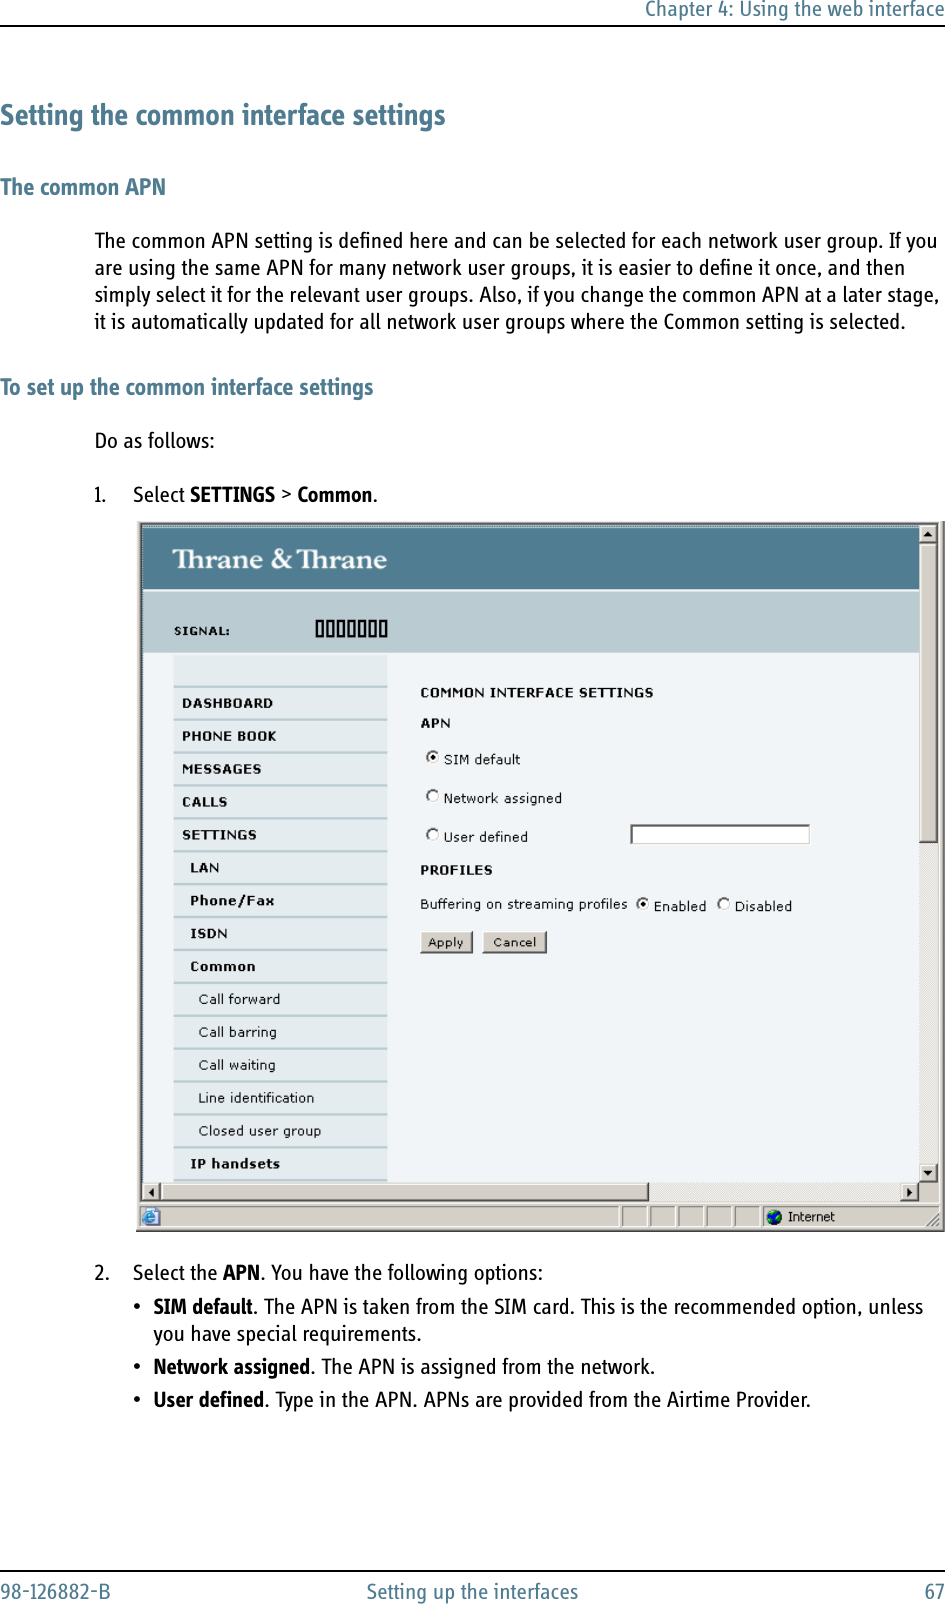 Chapter 4: Using the web interface98-126882-B Setting up the interfaces 67Setting the common interface settingsThe common APNThe common APN setting is defined here and can be selected for each network user group. If you are using the same APN for many network user groups, it is easier to define it once, and then simply select it for the relevant user groups. Also, if you change the common APN at a later stage, it is automatically updated for all network user groups where the Common setting is selected.To set up the common interface settingsDo as follows:1. Select SETTINGS &gt; Common.2. Select the APN. You have the following options:•SIM default. The APN is taken from the SIM card. This is the recommended option, unless you have special requirements.•Network assigned. The APN is assigned from the network.•User defined. Type in the APN. APNs are provided from the Airtime Provider.